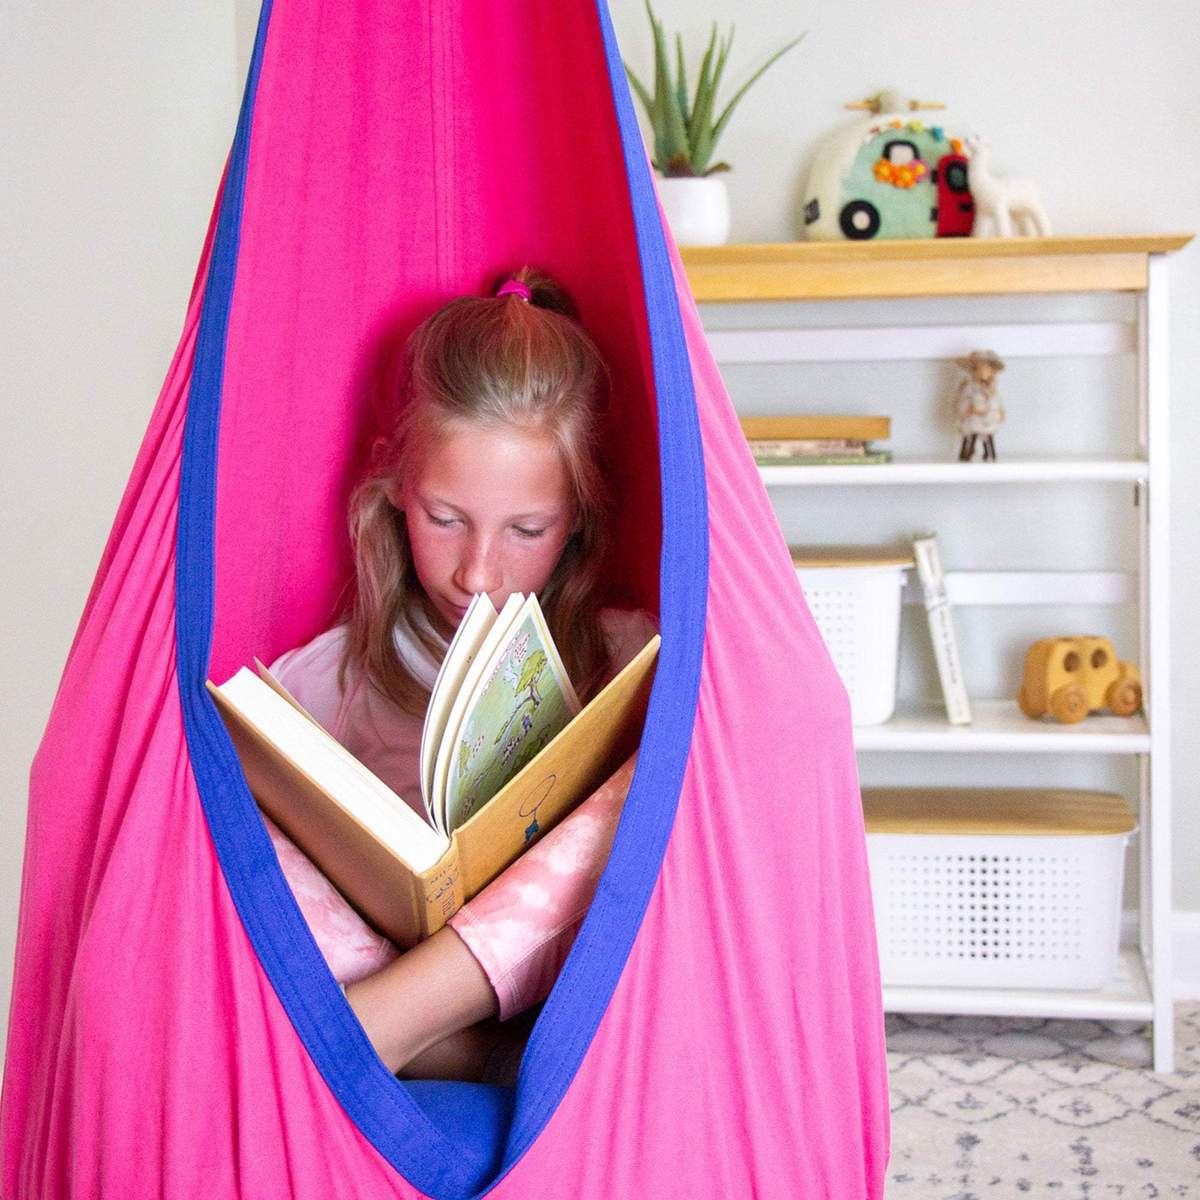 A child with light skin tone and blonde hair pulled back into a half ponytail sits in the pink Sensory Pod Swing. They are holding an open book and looking down at it.